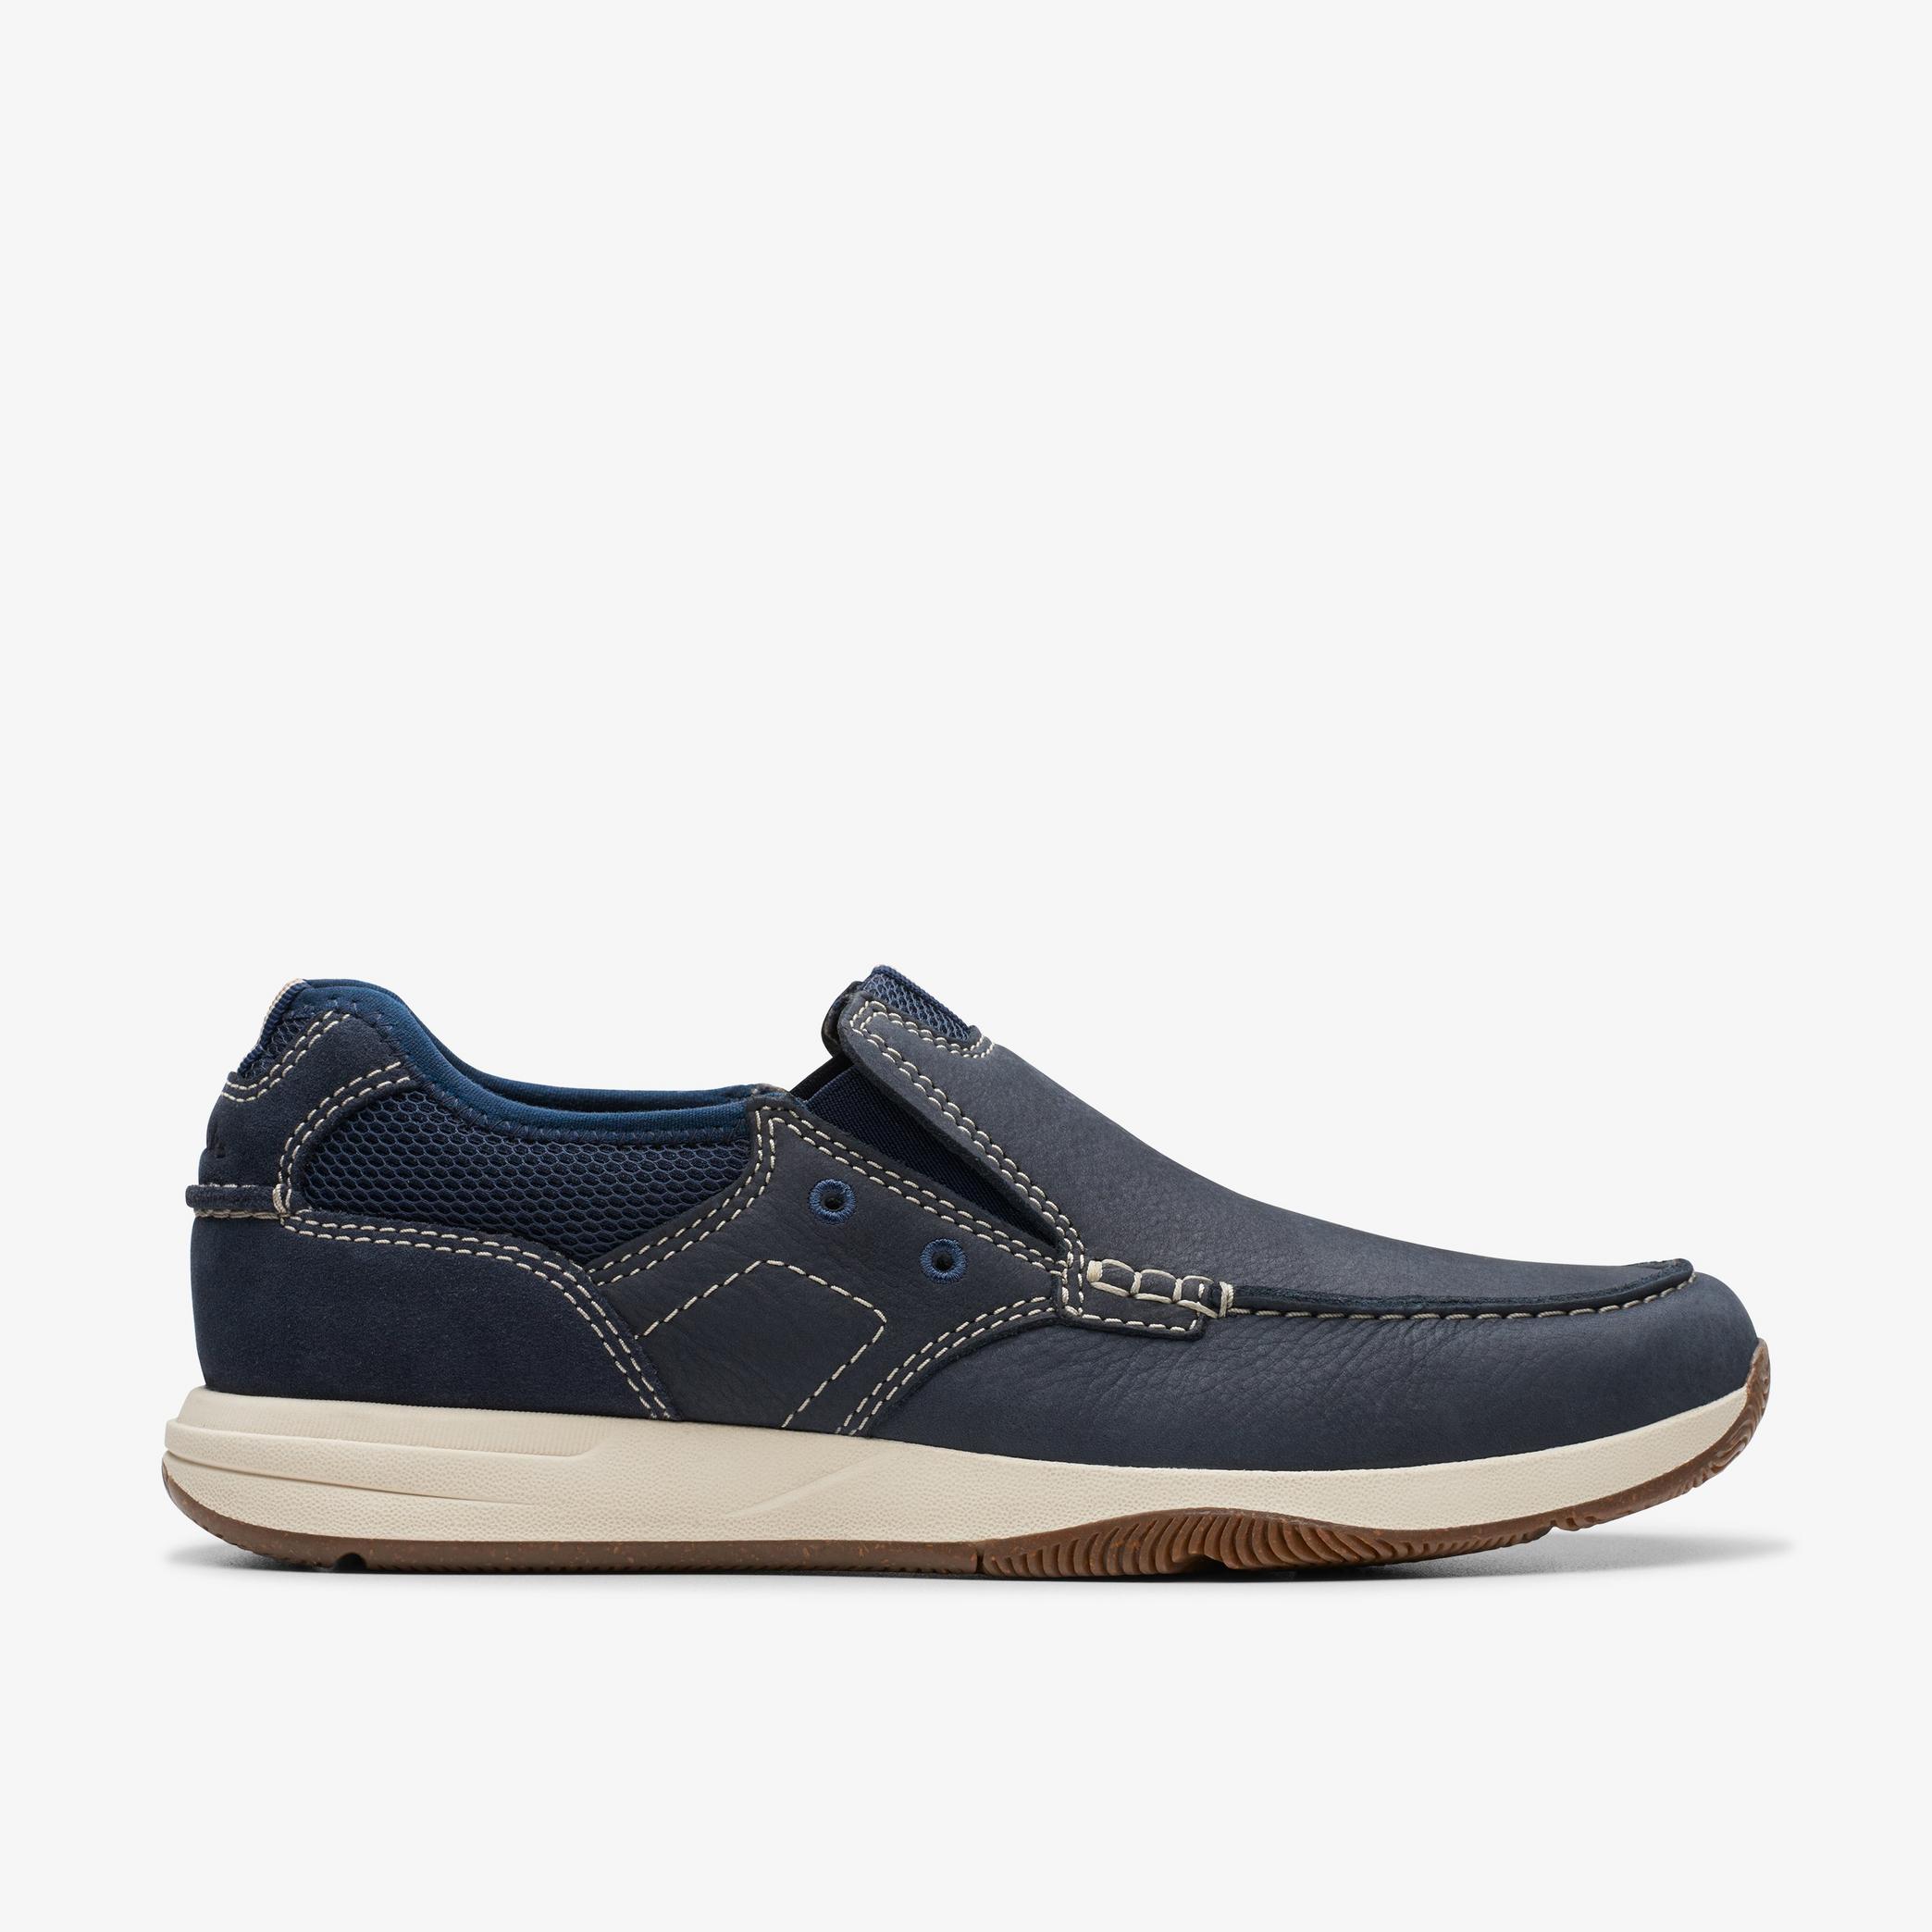 Sailview Step Navy Nubuck Boat Shoes, view 1 of 6